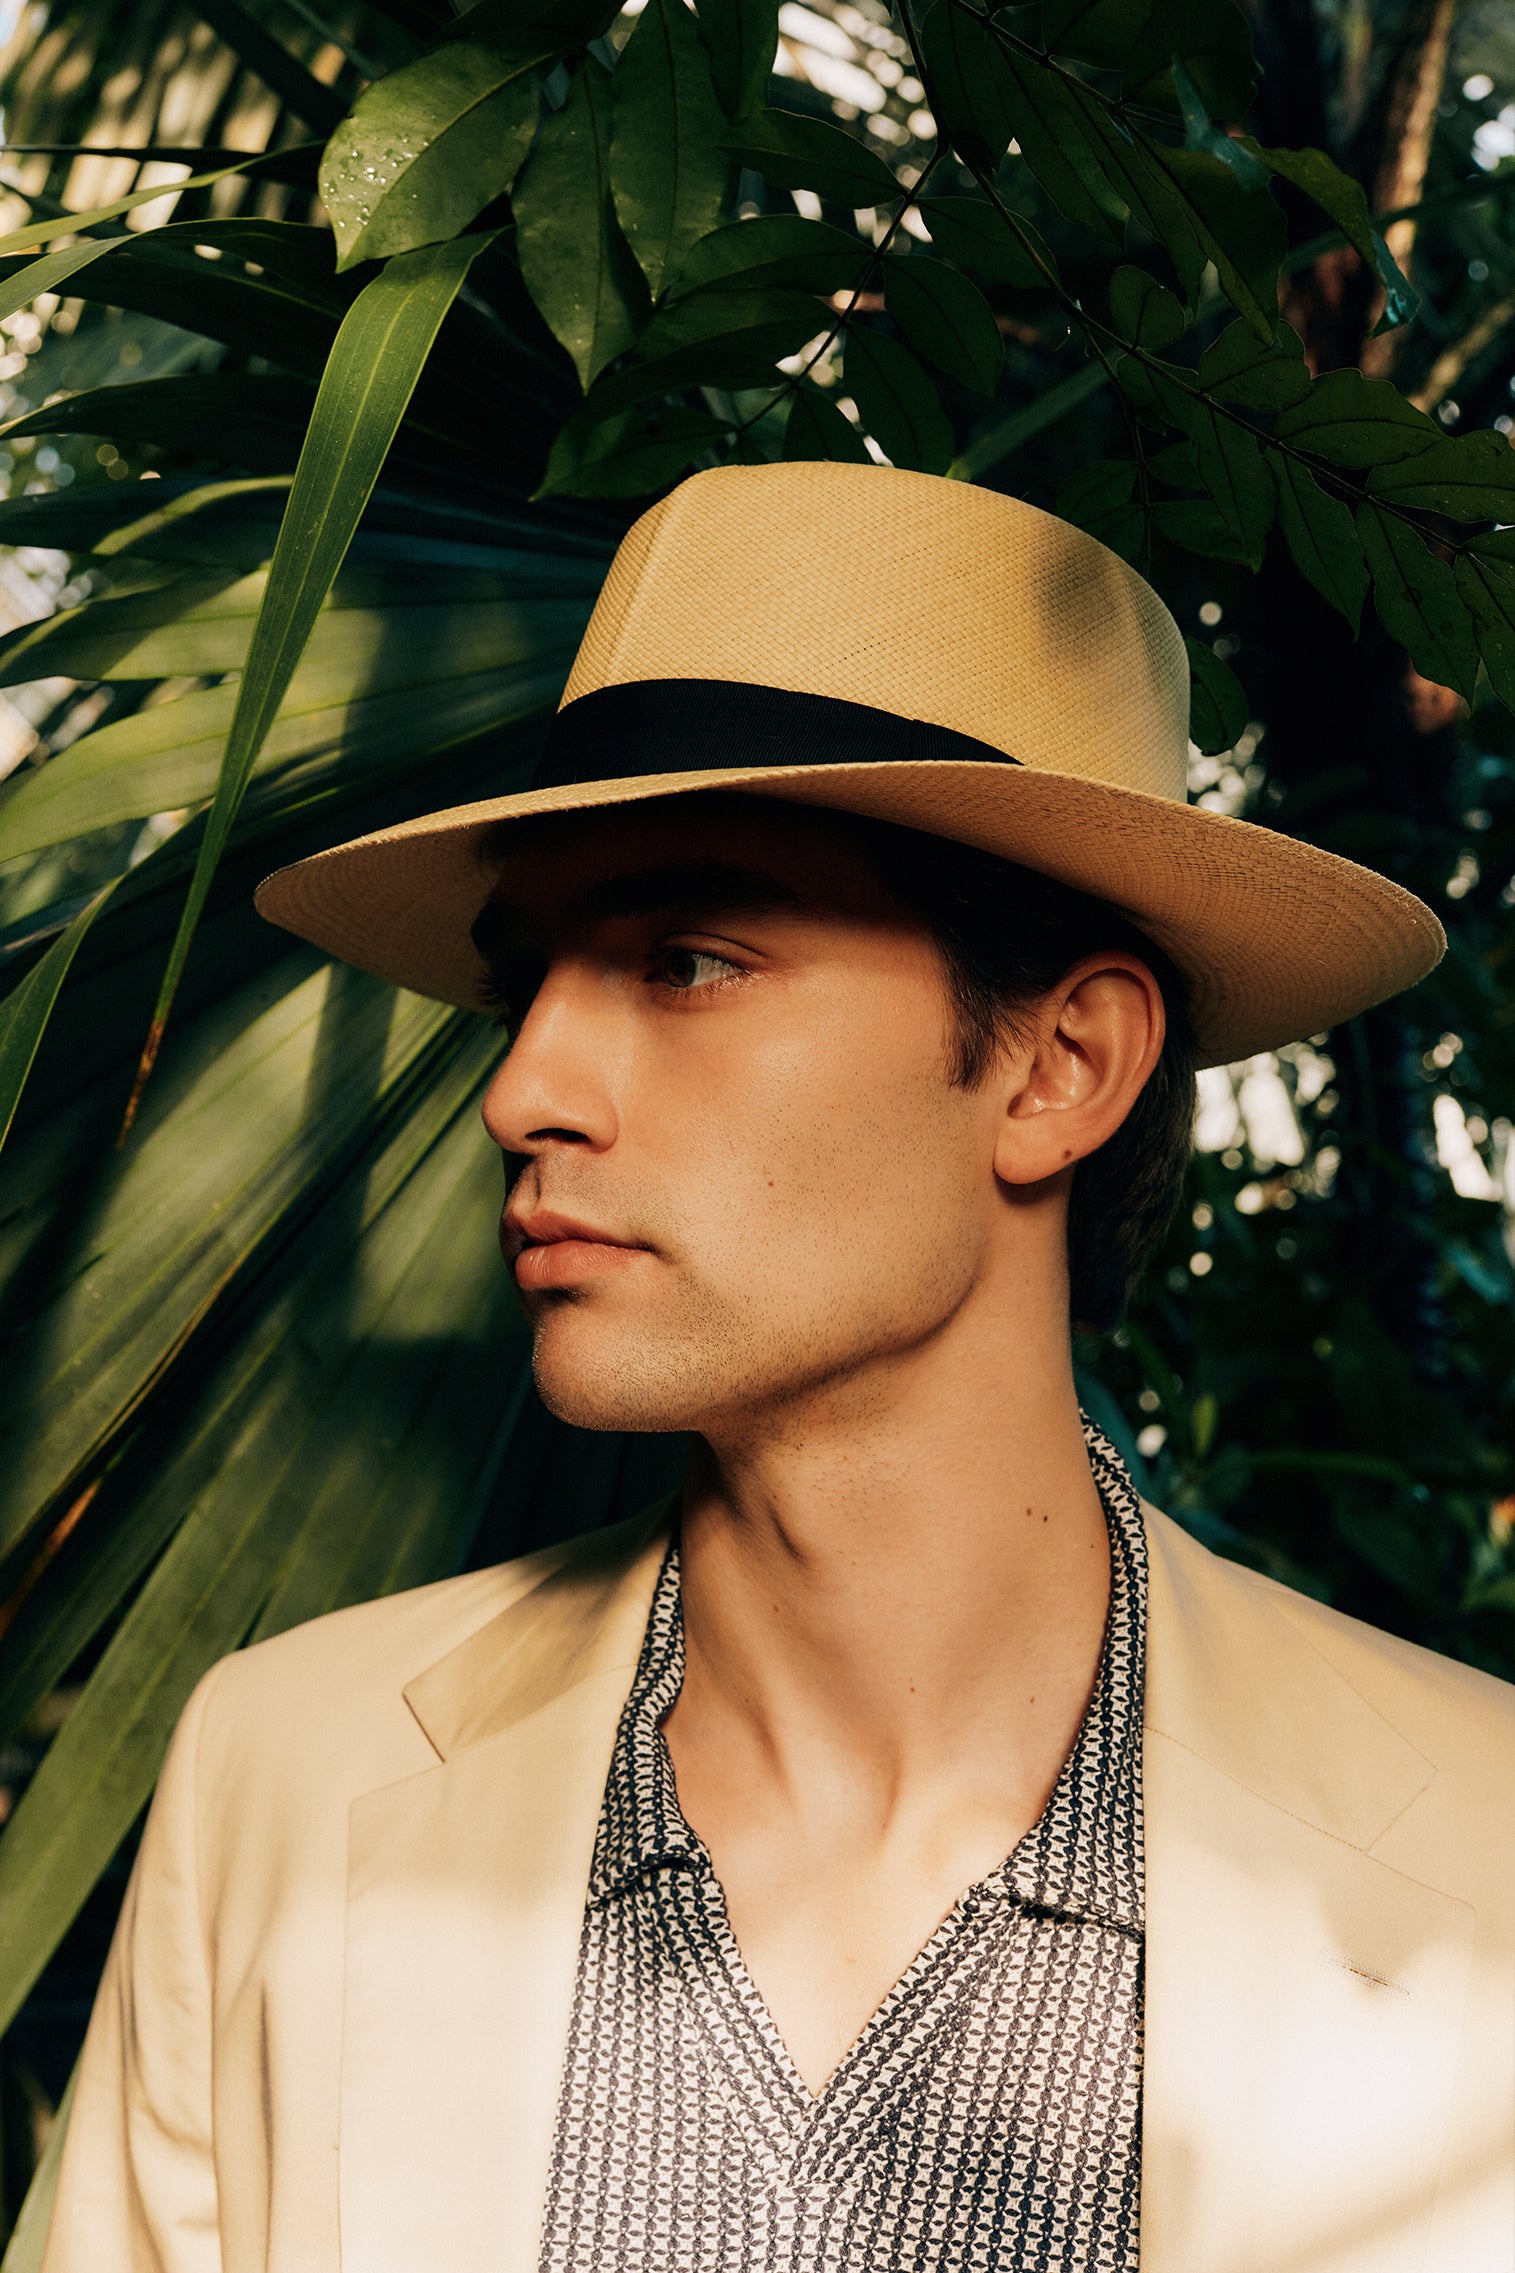 Men's Rollable Panama - Panamas, Straw and Sun Hats for Men - Lock & Co. Hatters London UK